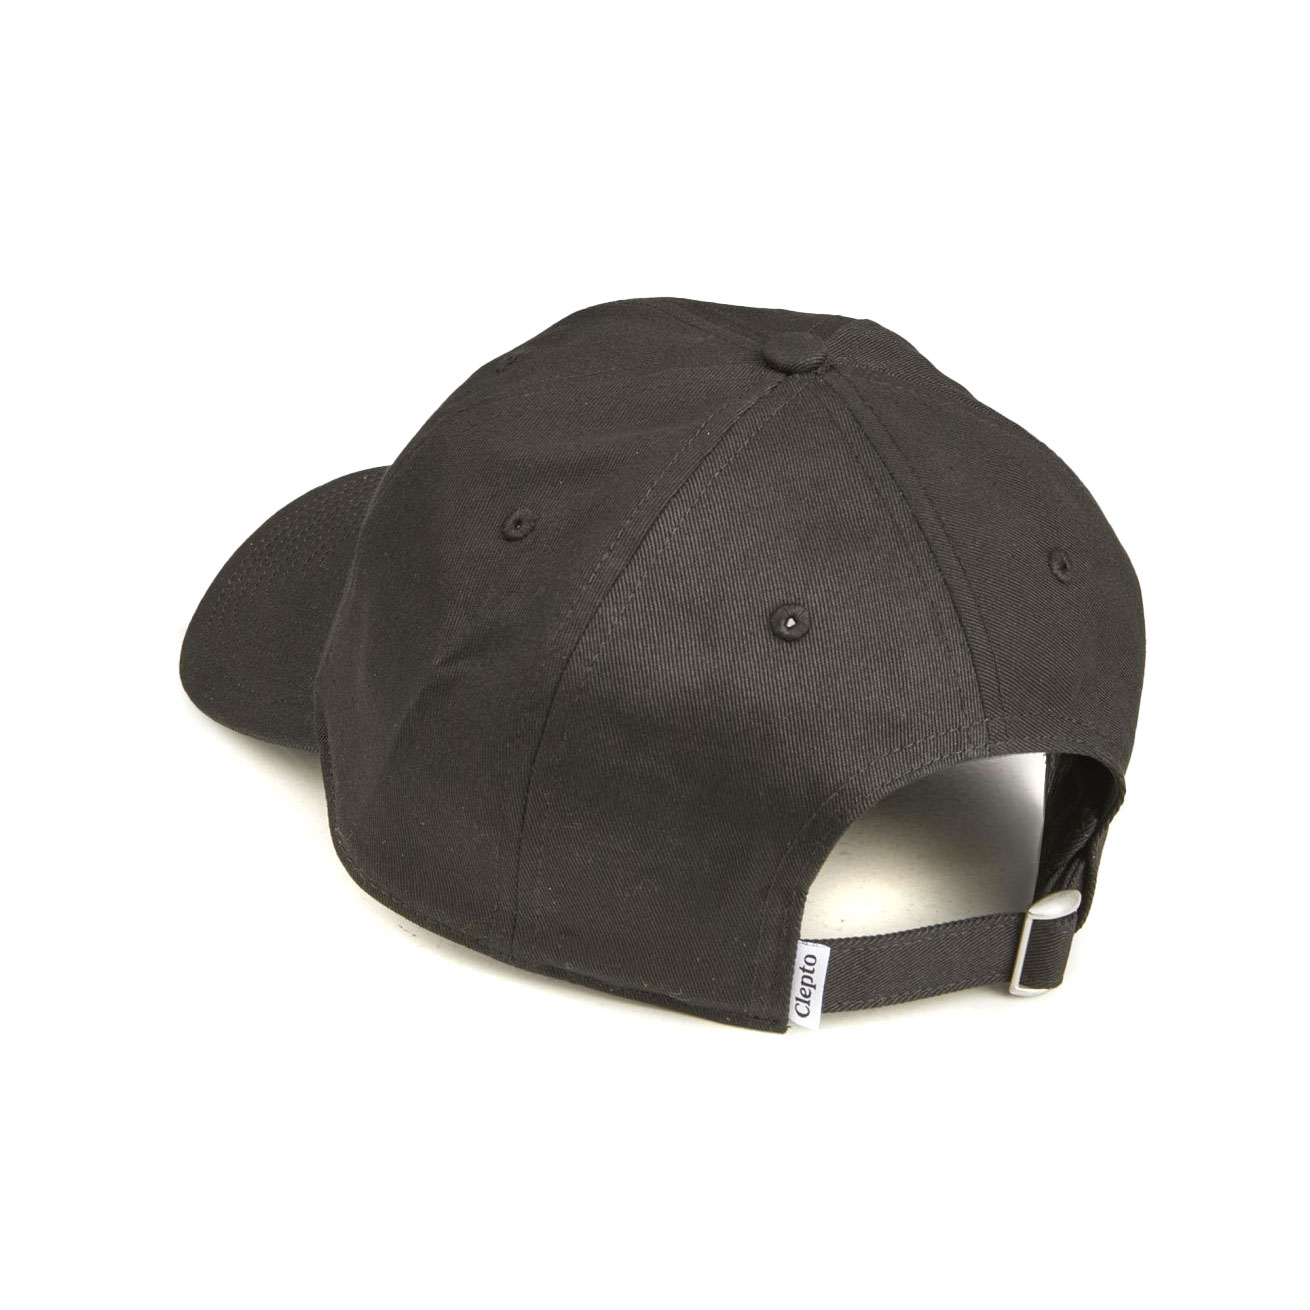 Cleptomanicx Cap Good thoughts (black)